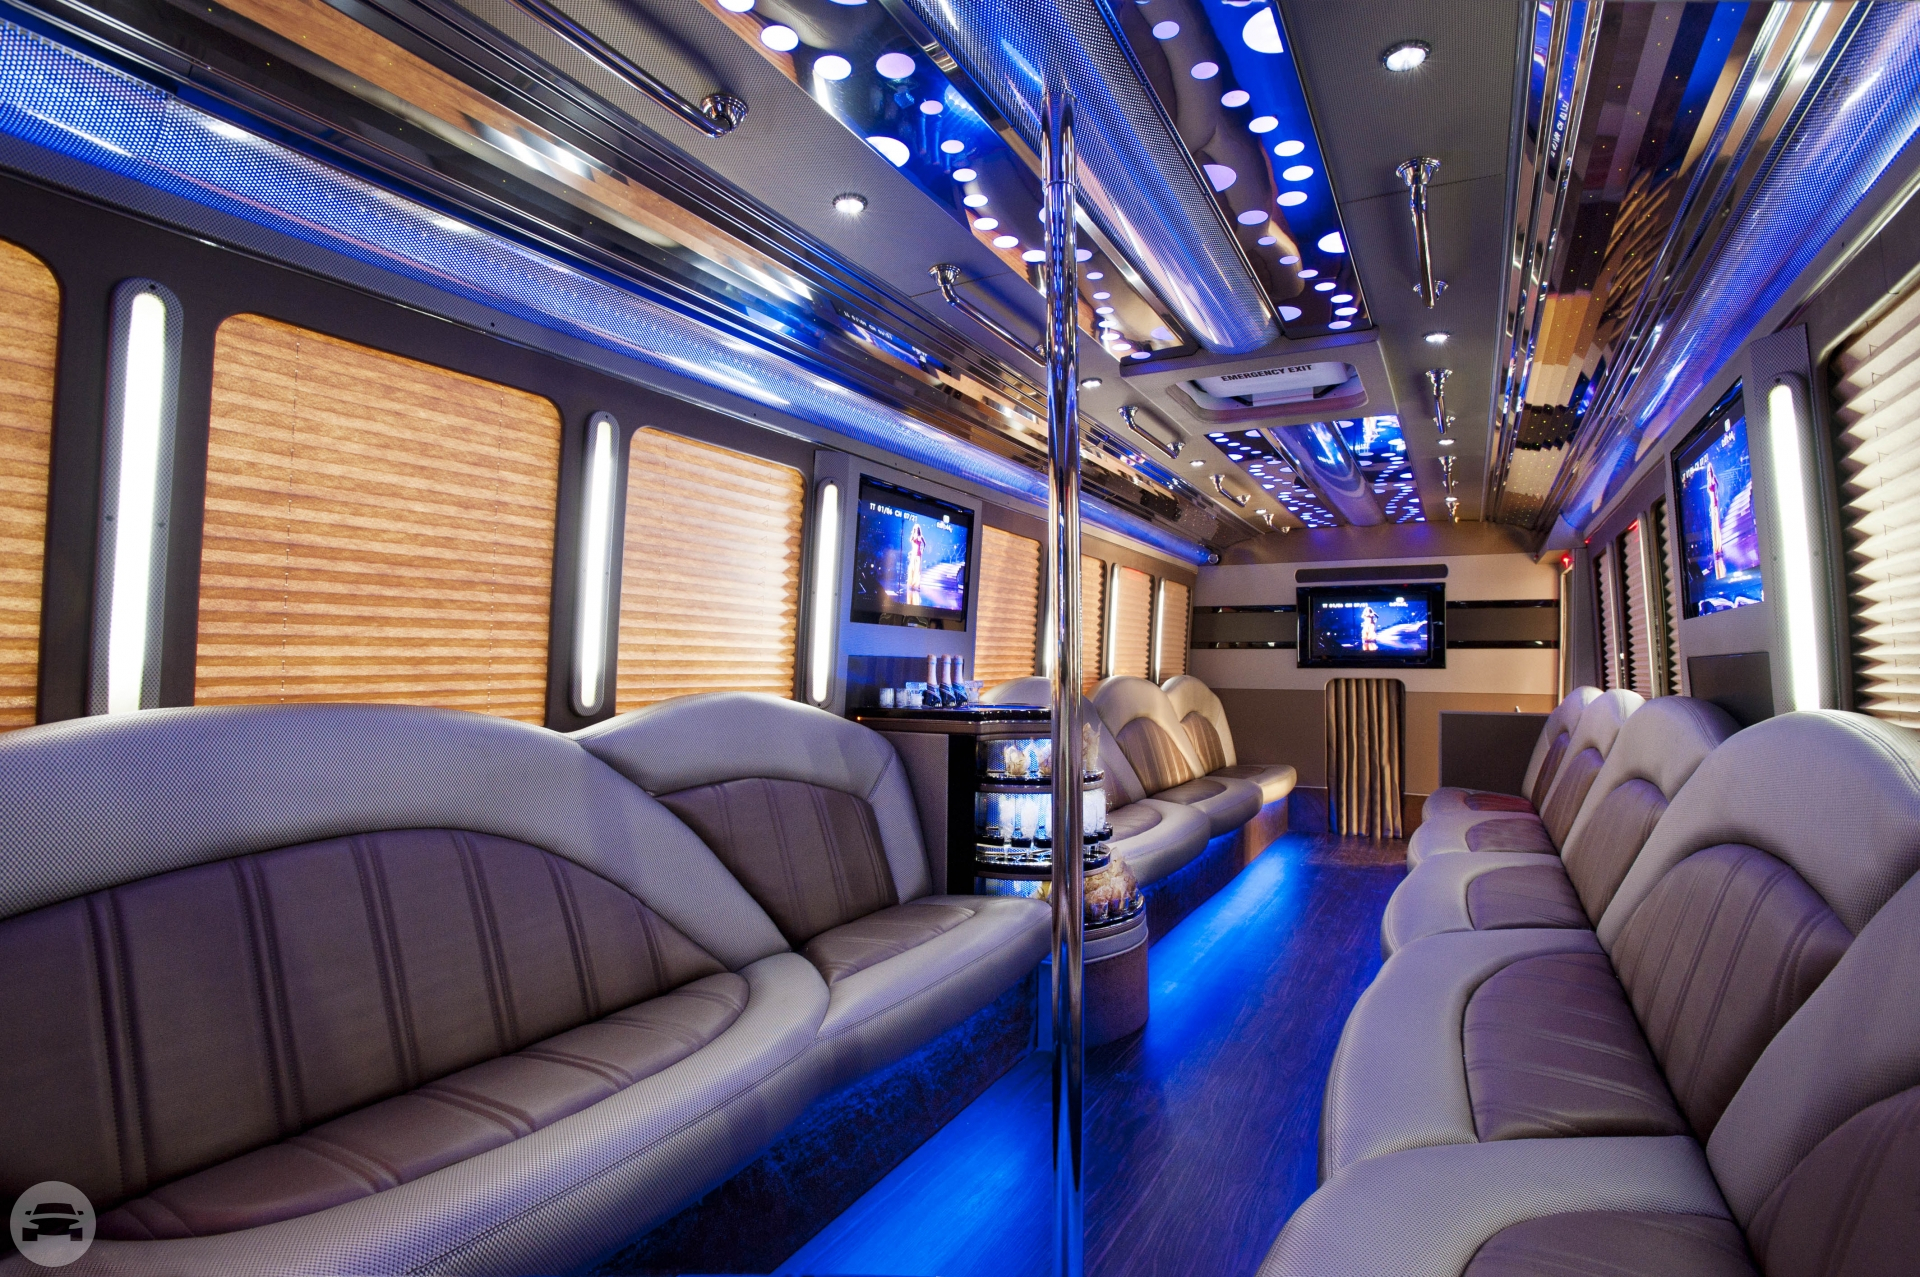 30 Passenger Party Bus
Party Limo Bus /
Schenectady, NY

 / Hourly $0.00
